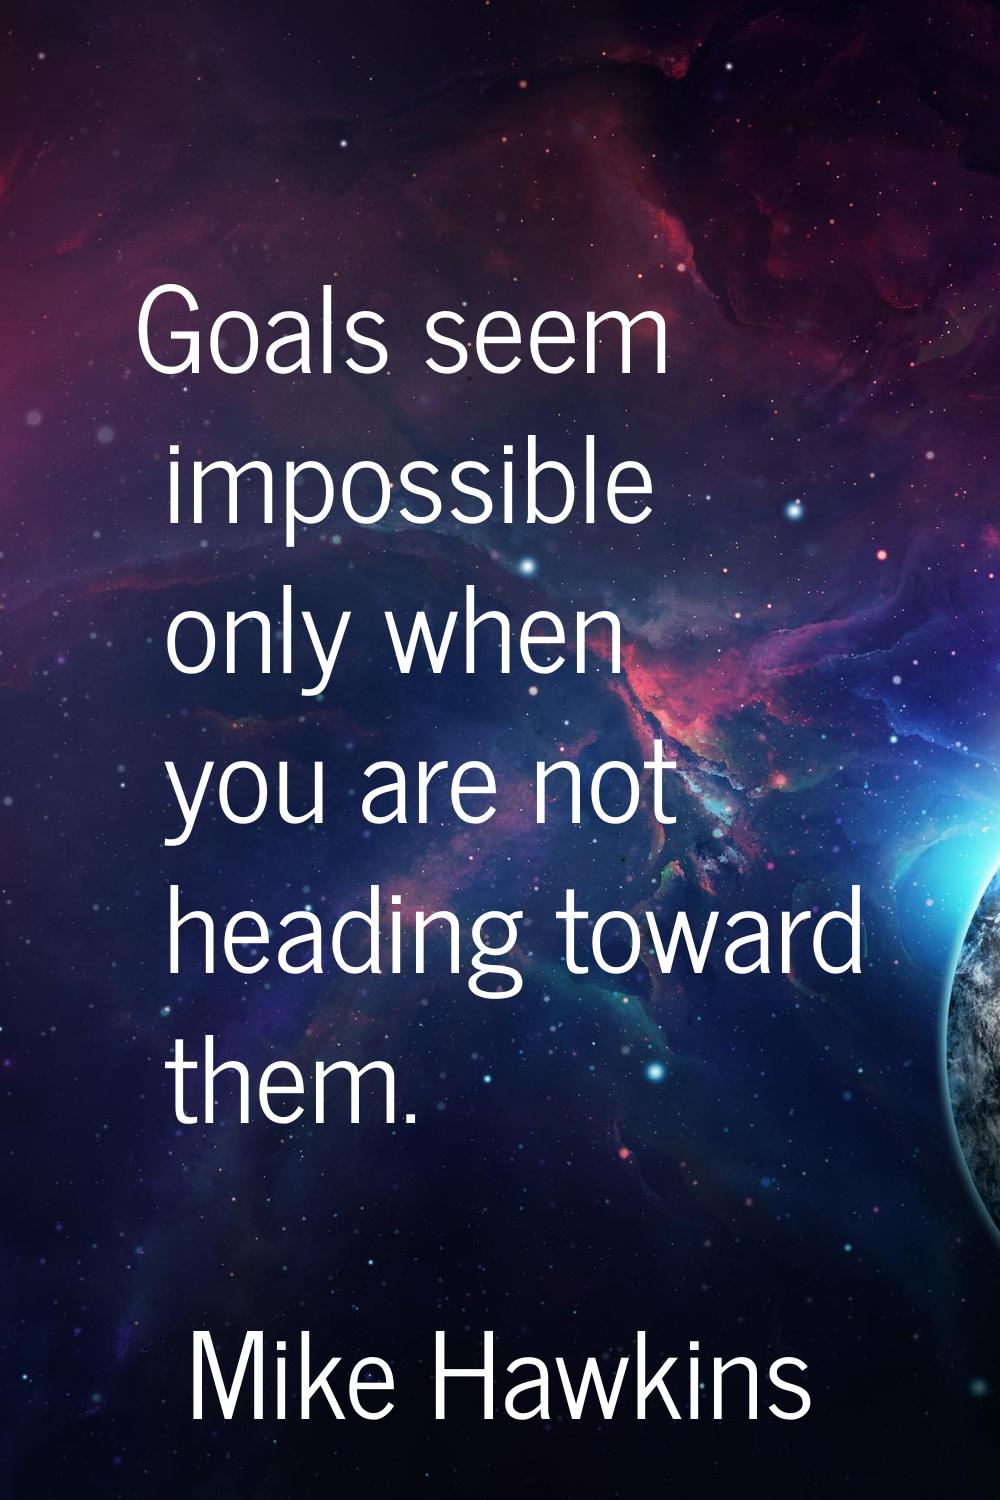 Goals seem impossible only when you are not heading toward them.